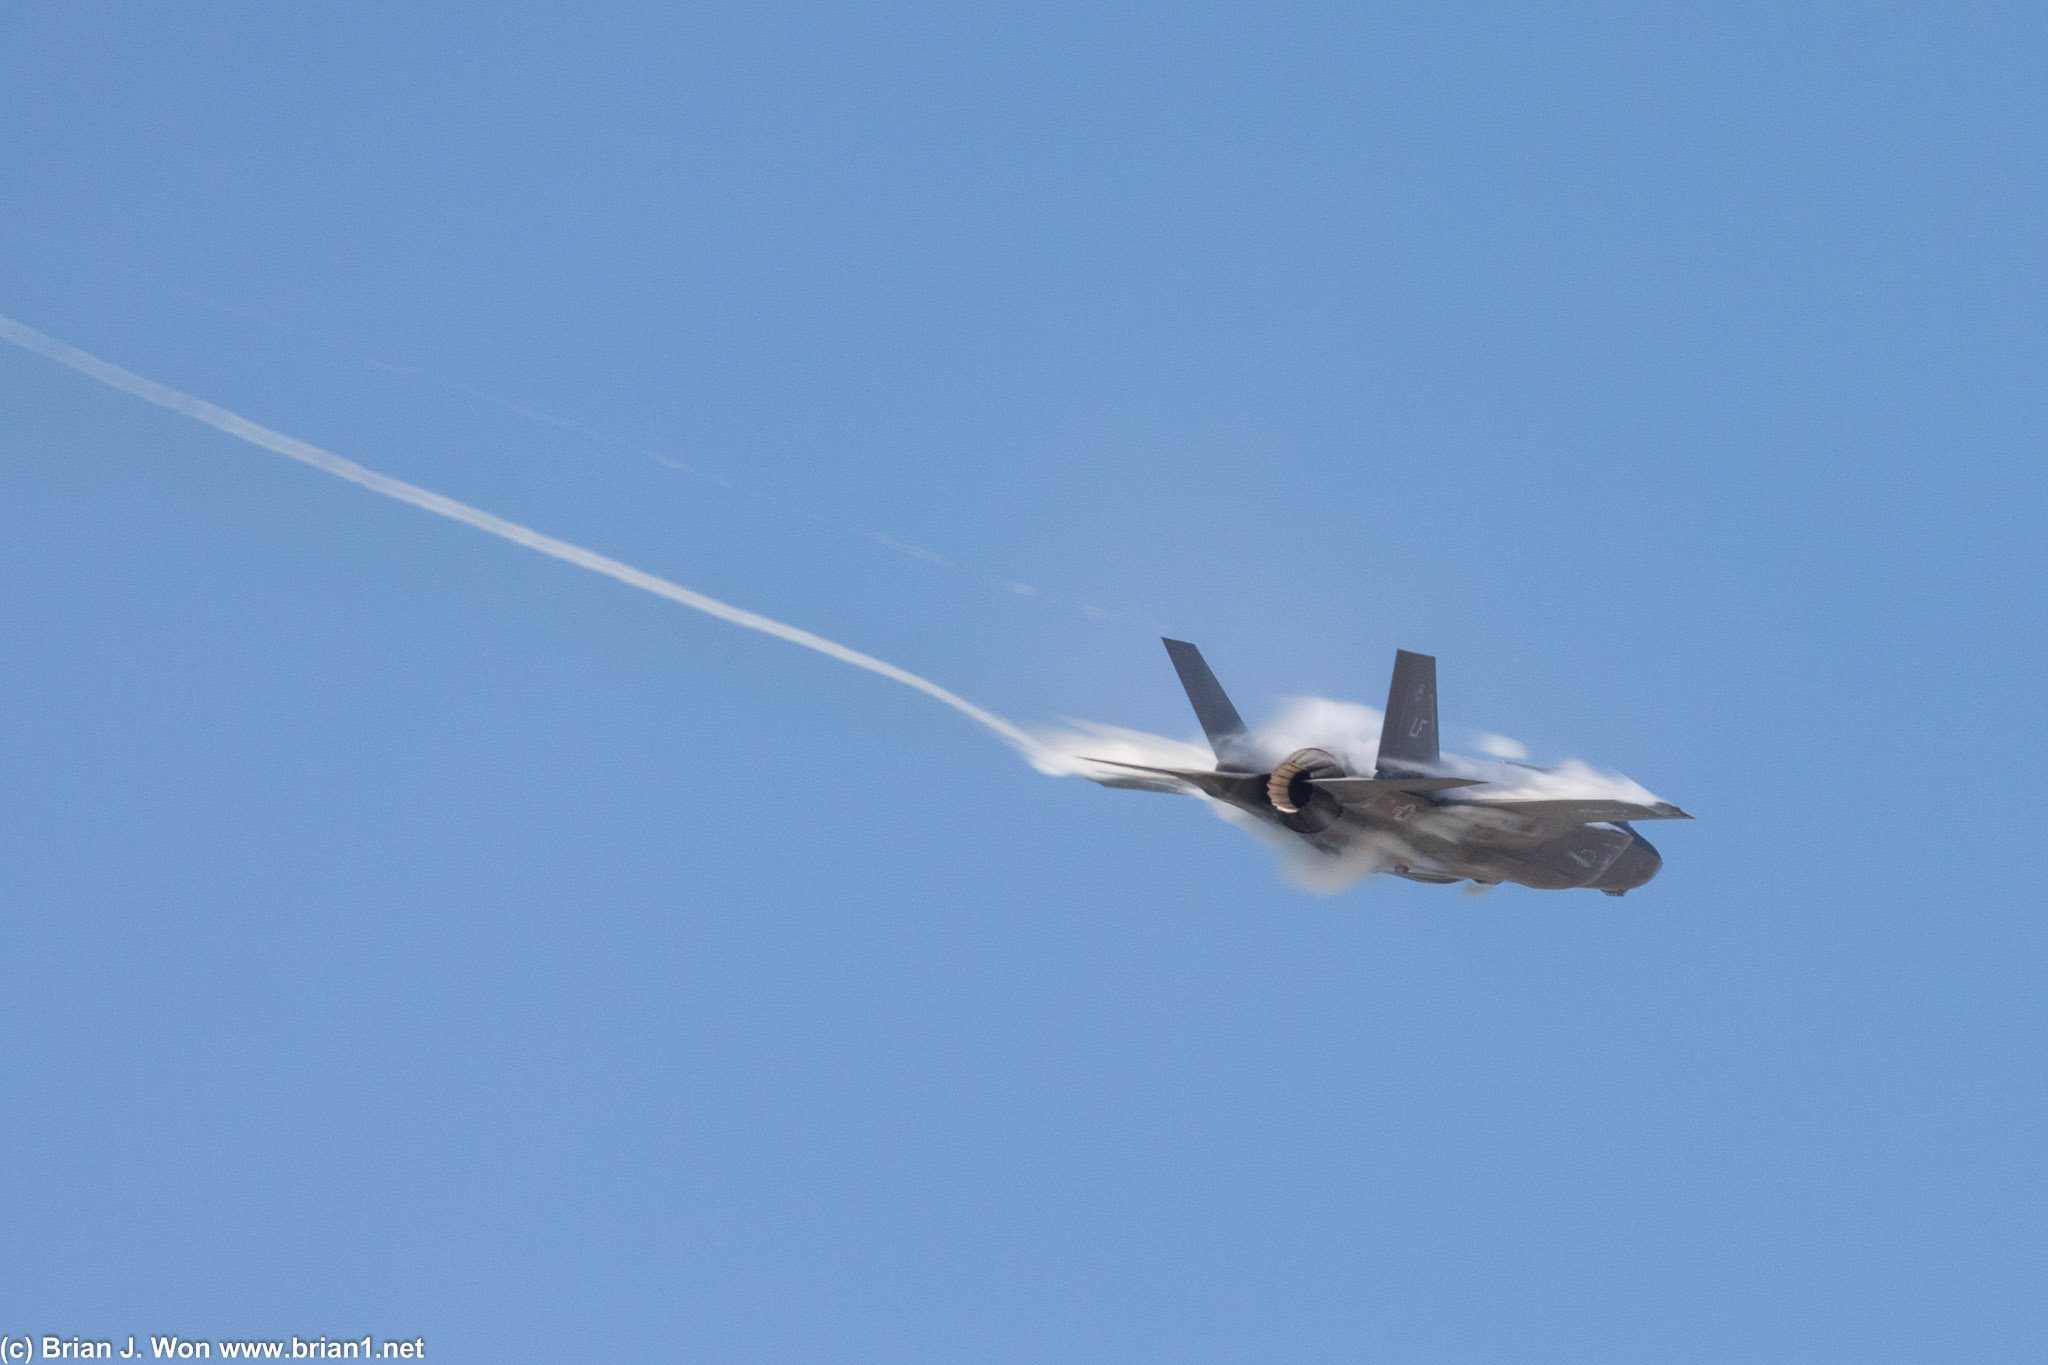 The only way this shot would be better is if the afterburner was lit, but then you'd lose the vapor cone pretty quick!